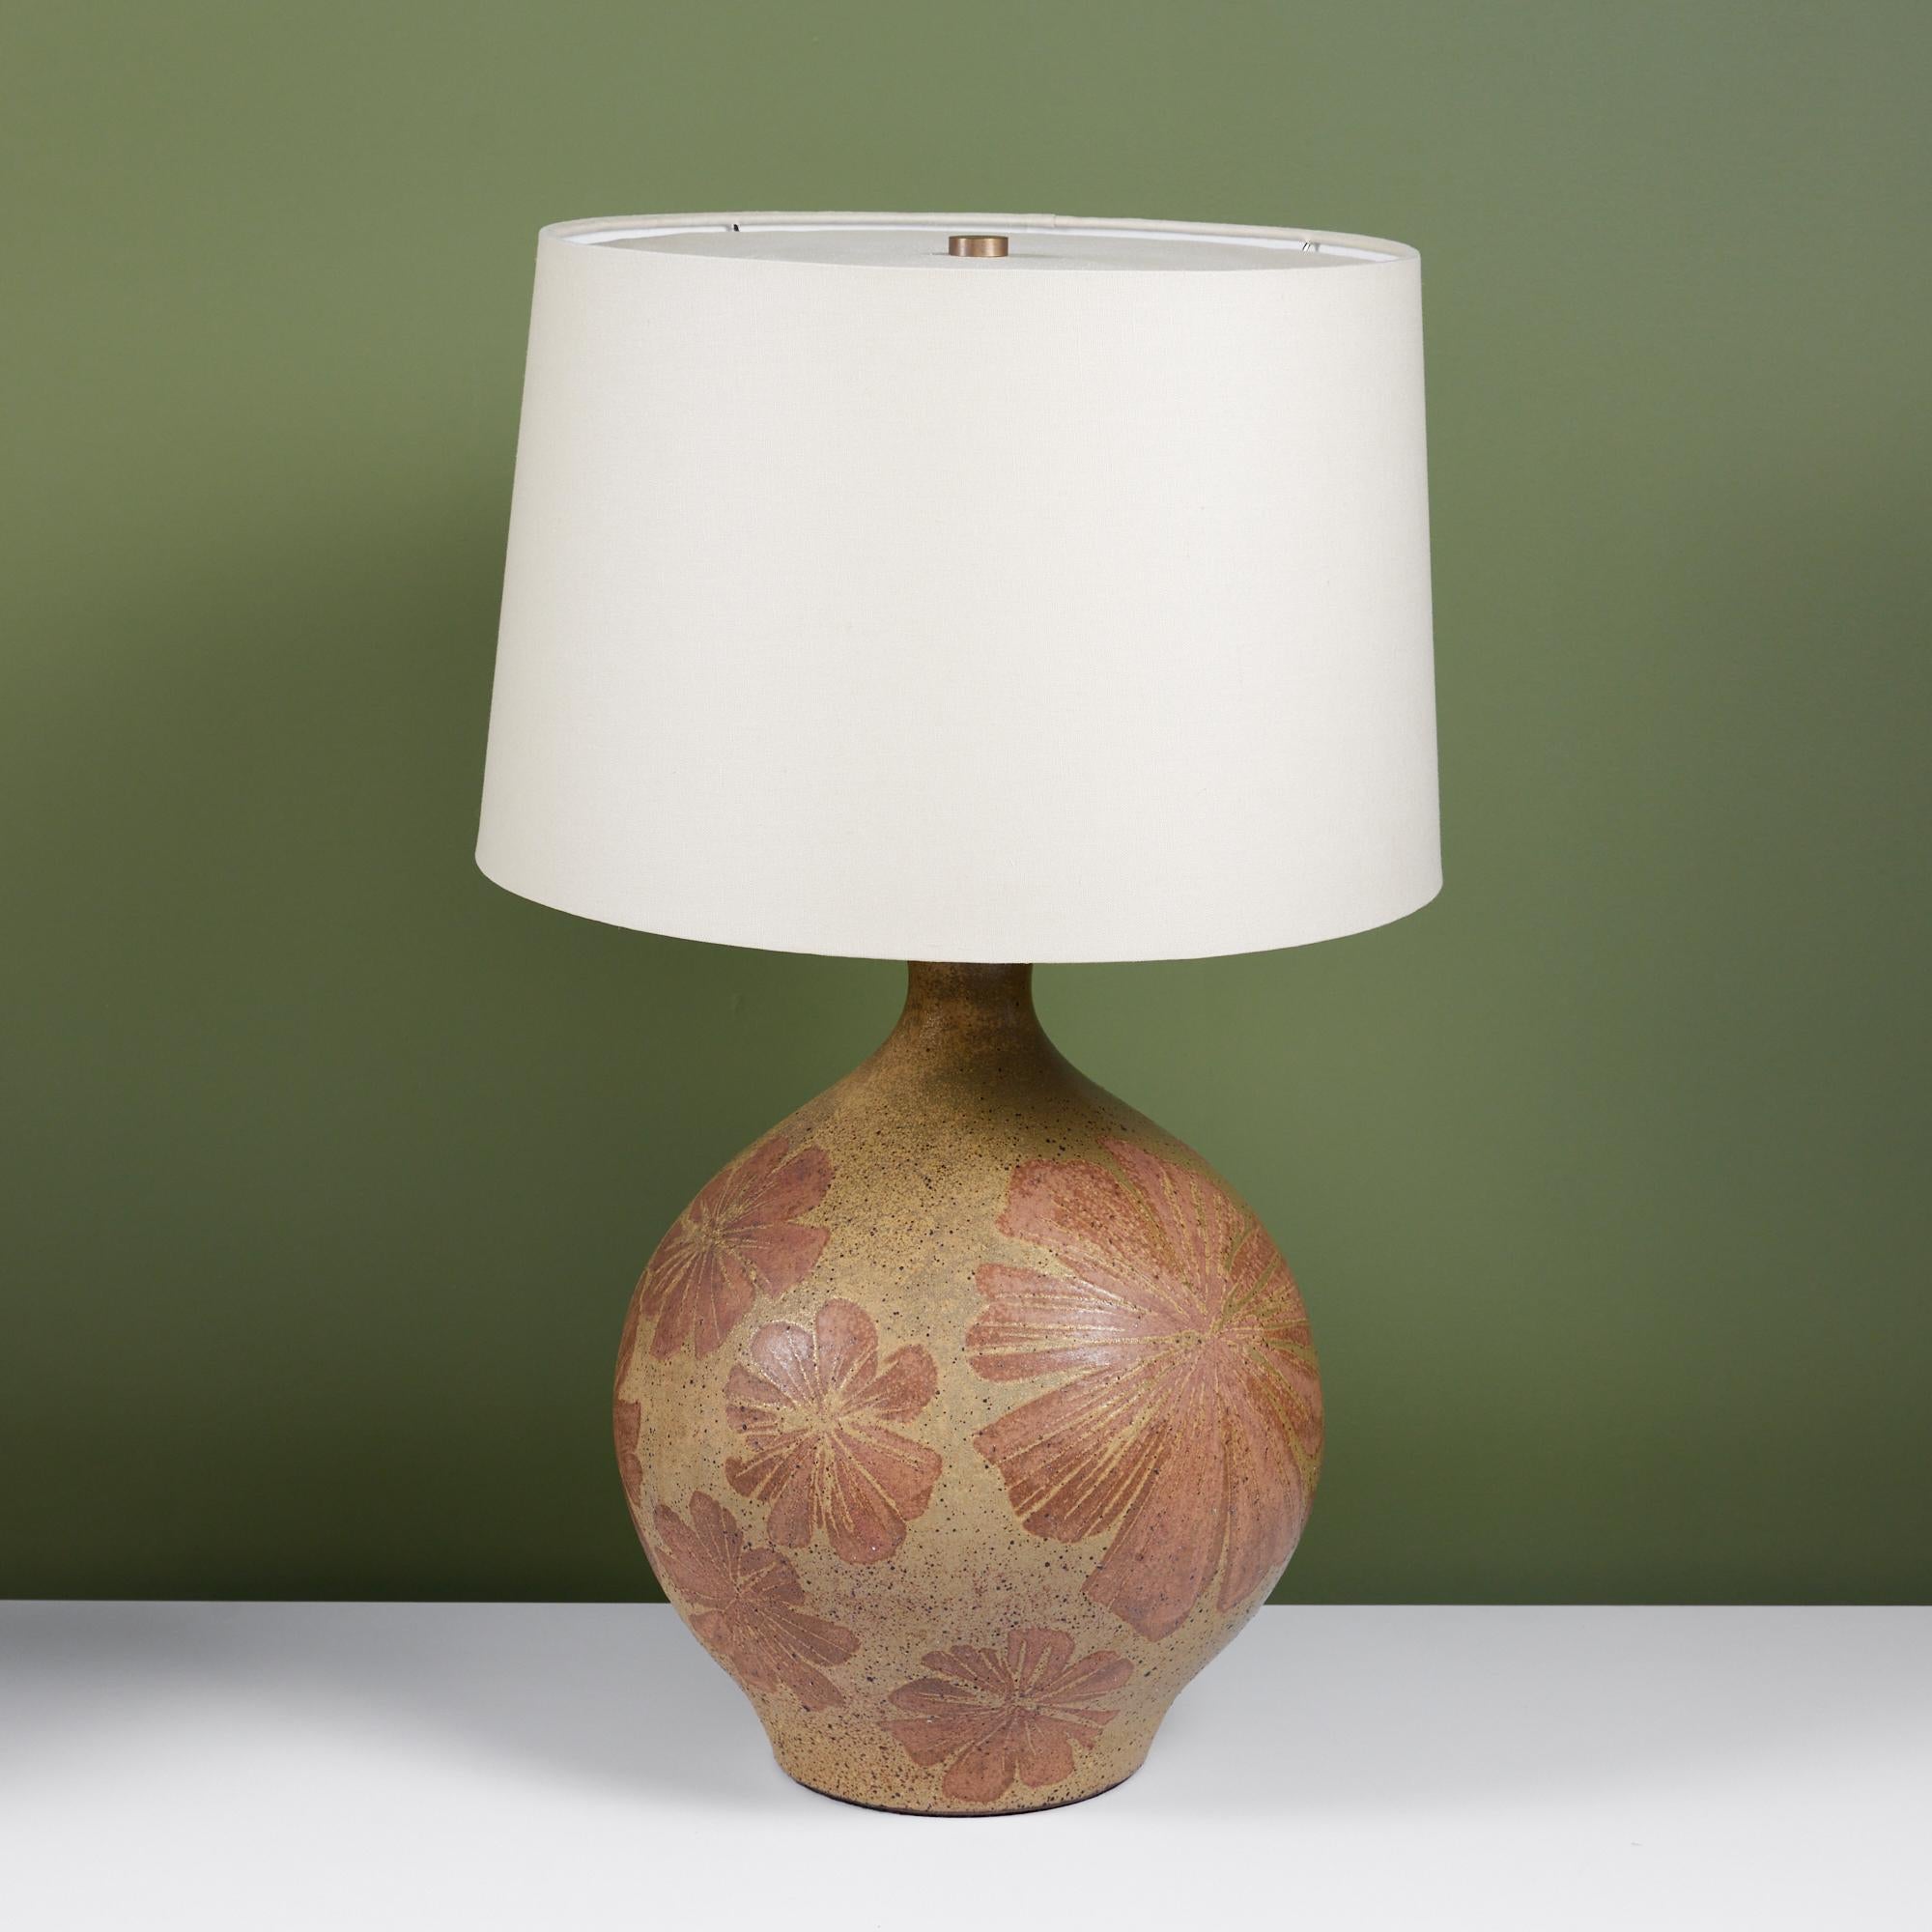 Large scale David Cressey Ceramic Lamp, c.1960s, USA. The wheel thrown ceramic lamp features a speckled greenish colored glaze with applied floral detailing in a brown-red tone. The newly rewired lamp features a new linen shade. The shade and